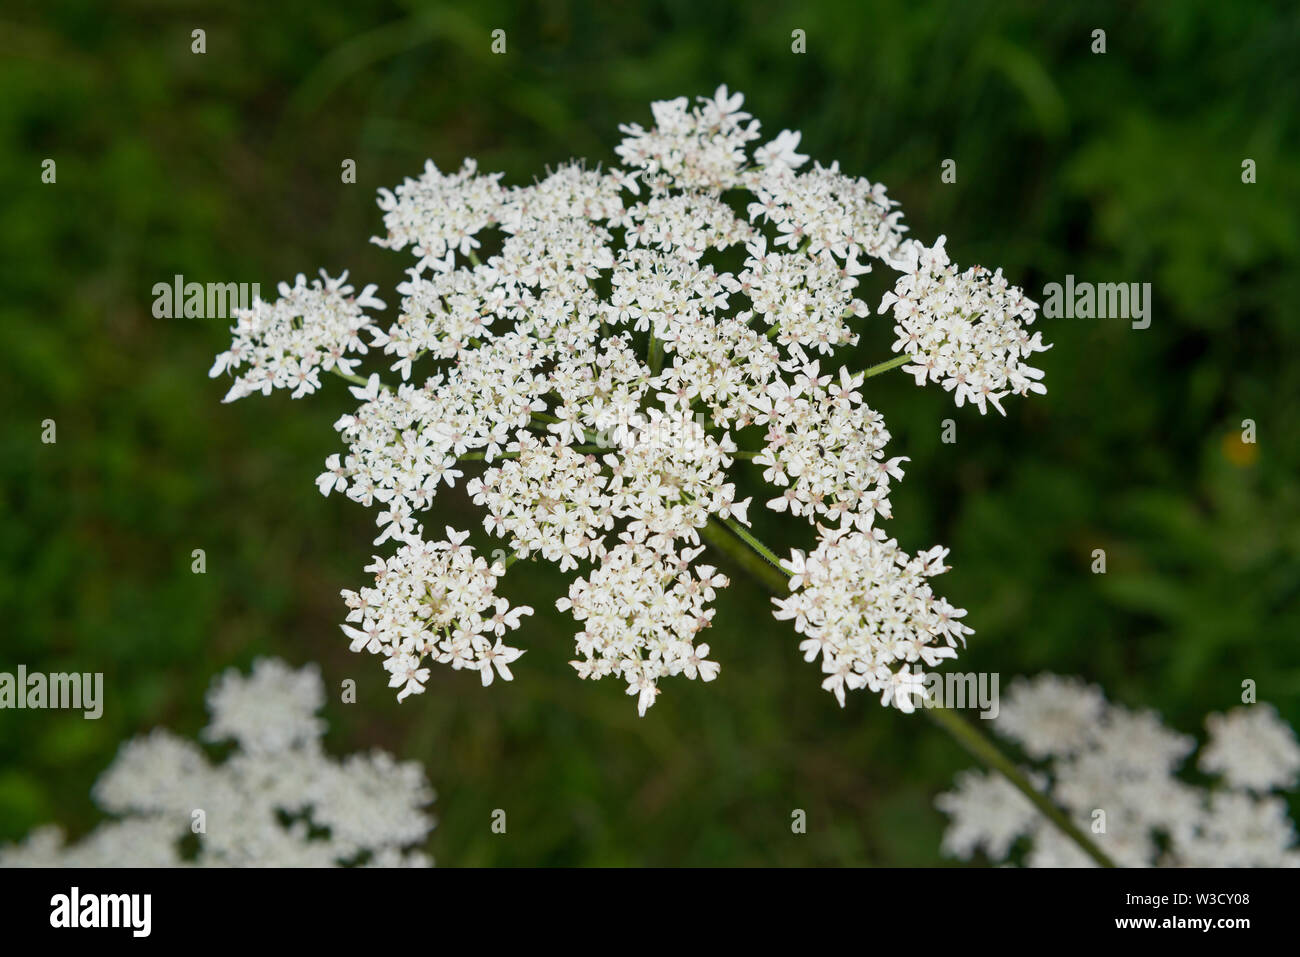 The invasive plant specifies Giant Hogweed (Heracleum mantegazzianum) growing in the UK. Stock Photo